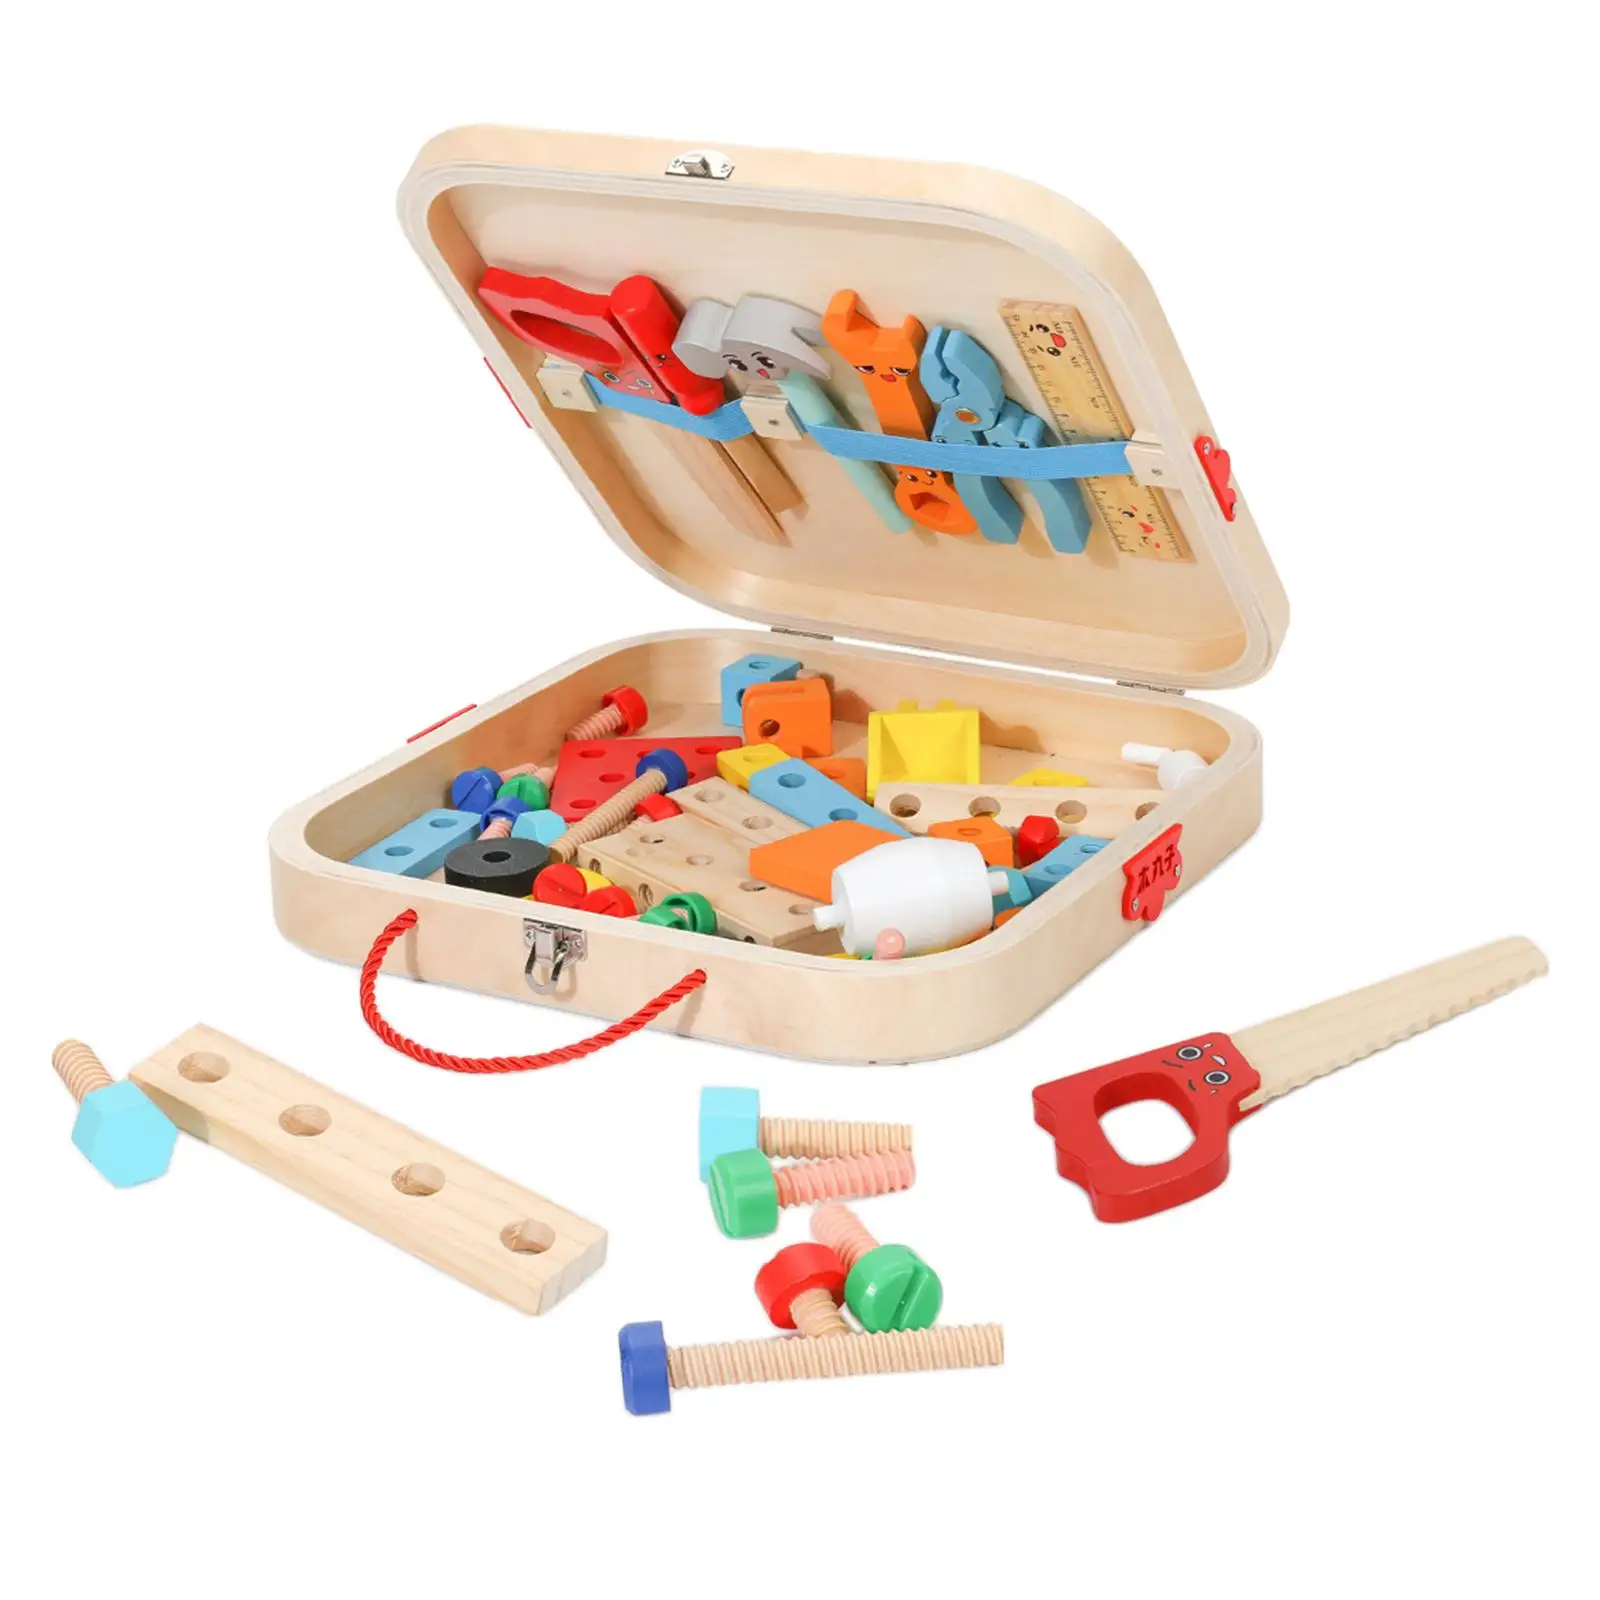 Tool Set for Kids Construction Toy Set Colorful Montessori Educational Toy Wooden Tool Box for Birthday Gift Bedroom Home